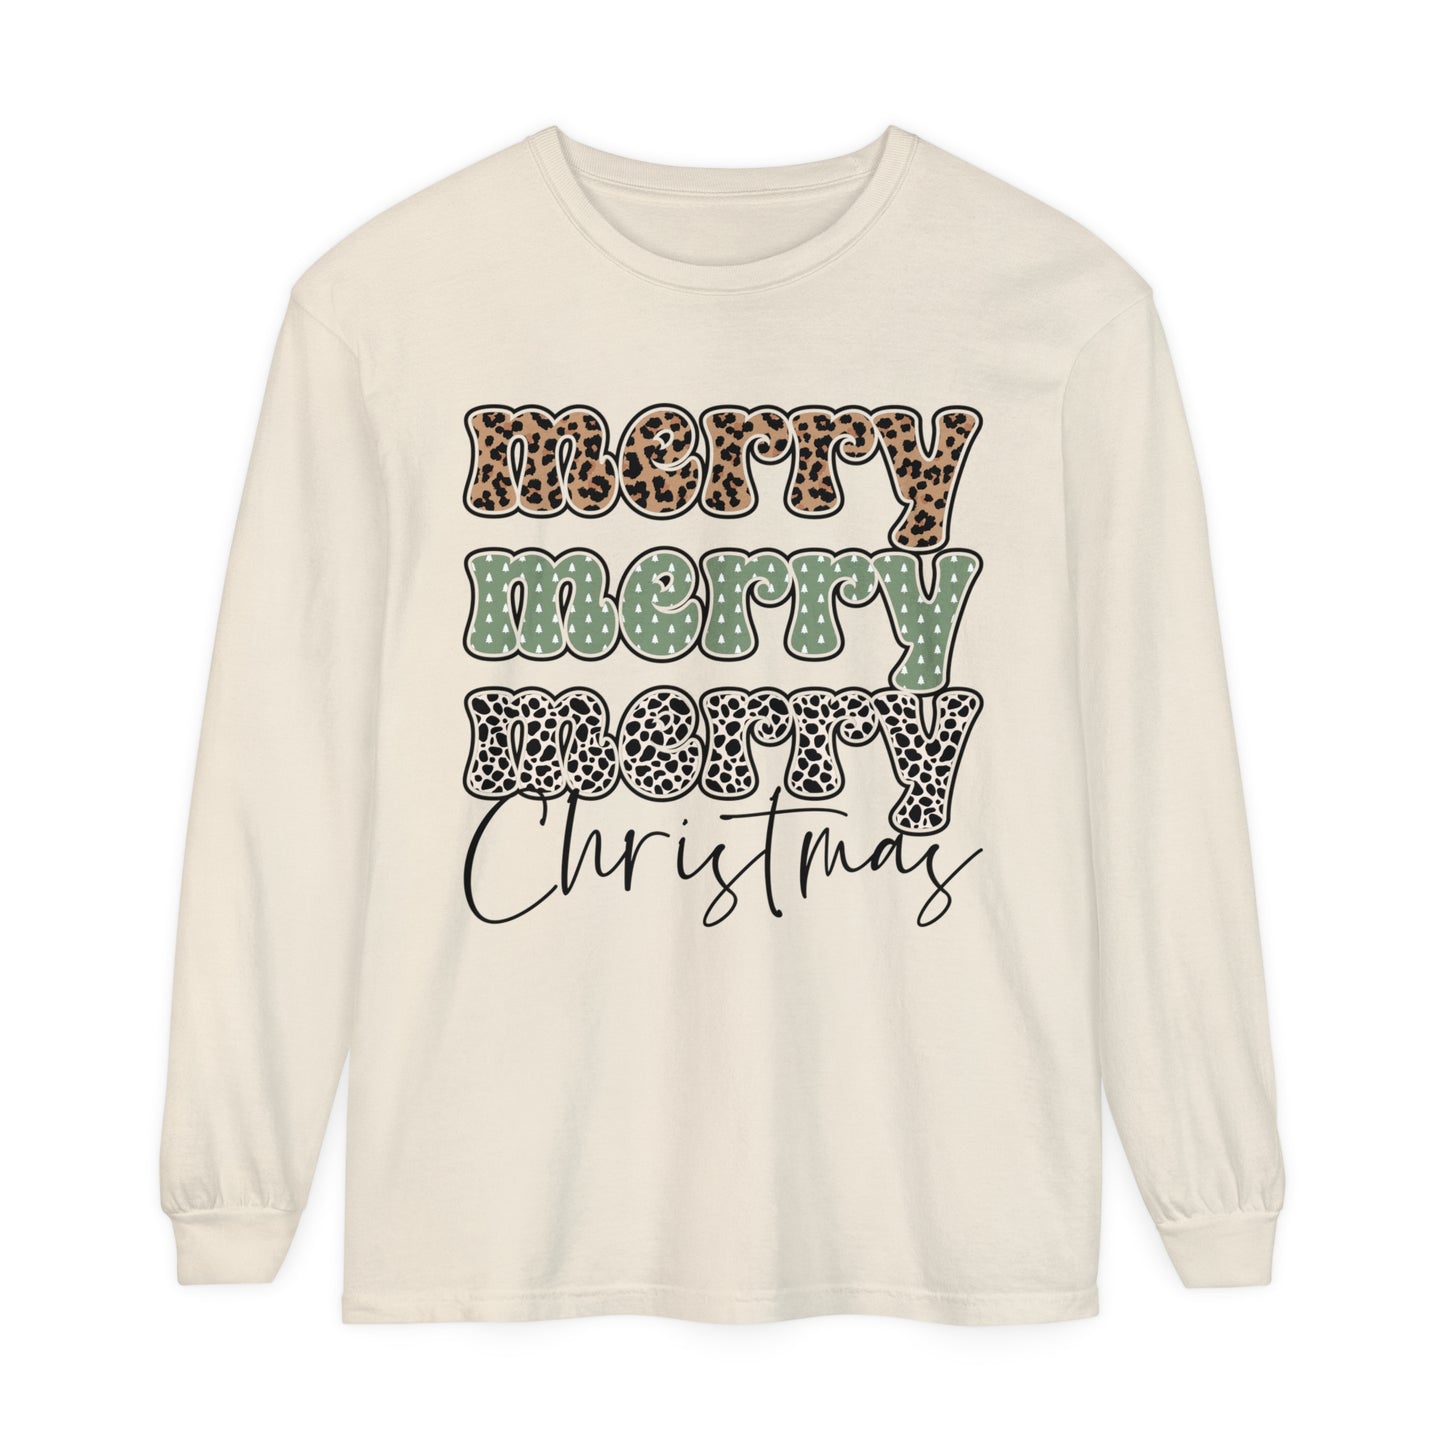 Merry Merry Merry Christmas Women's Holiday Loose Long Sleeve T-Shirt